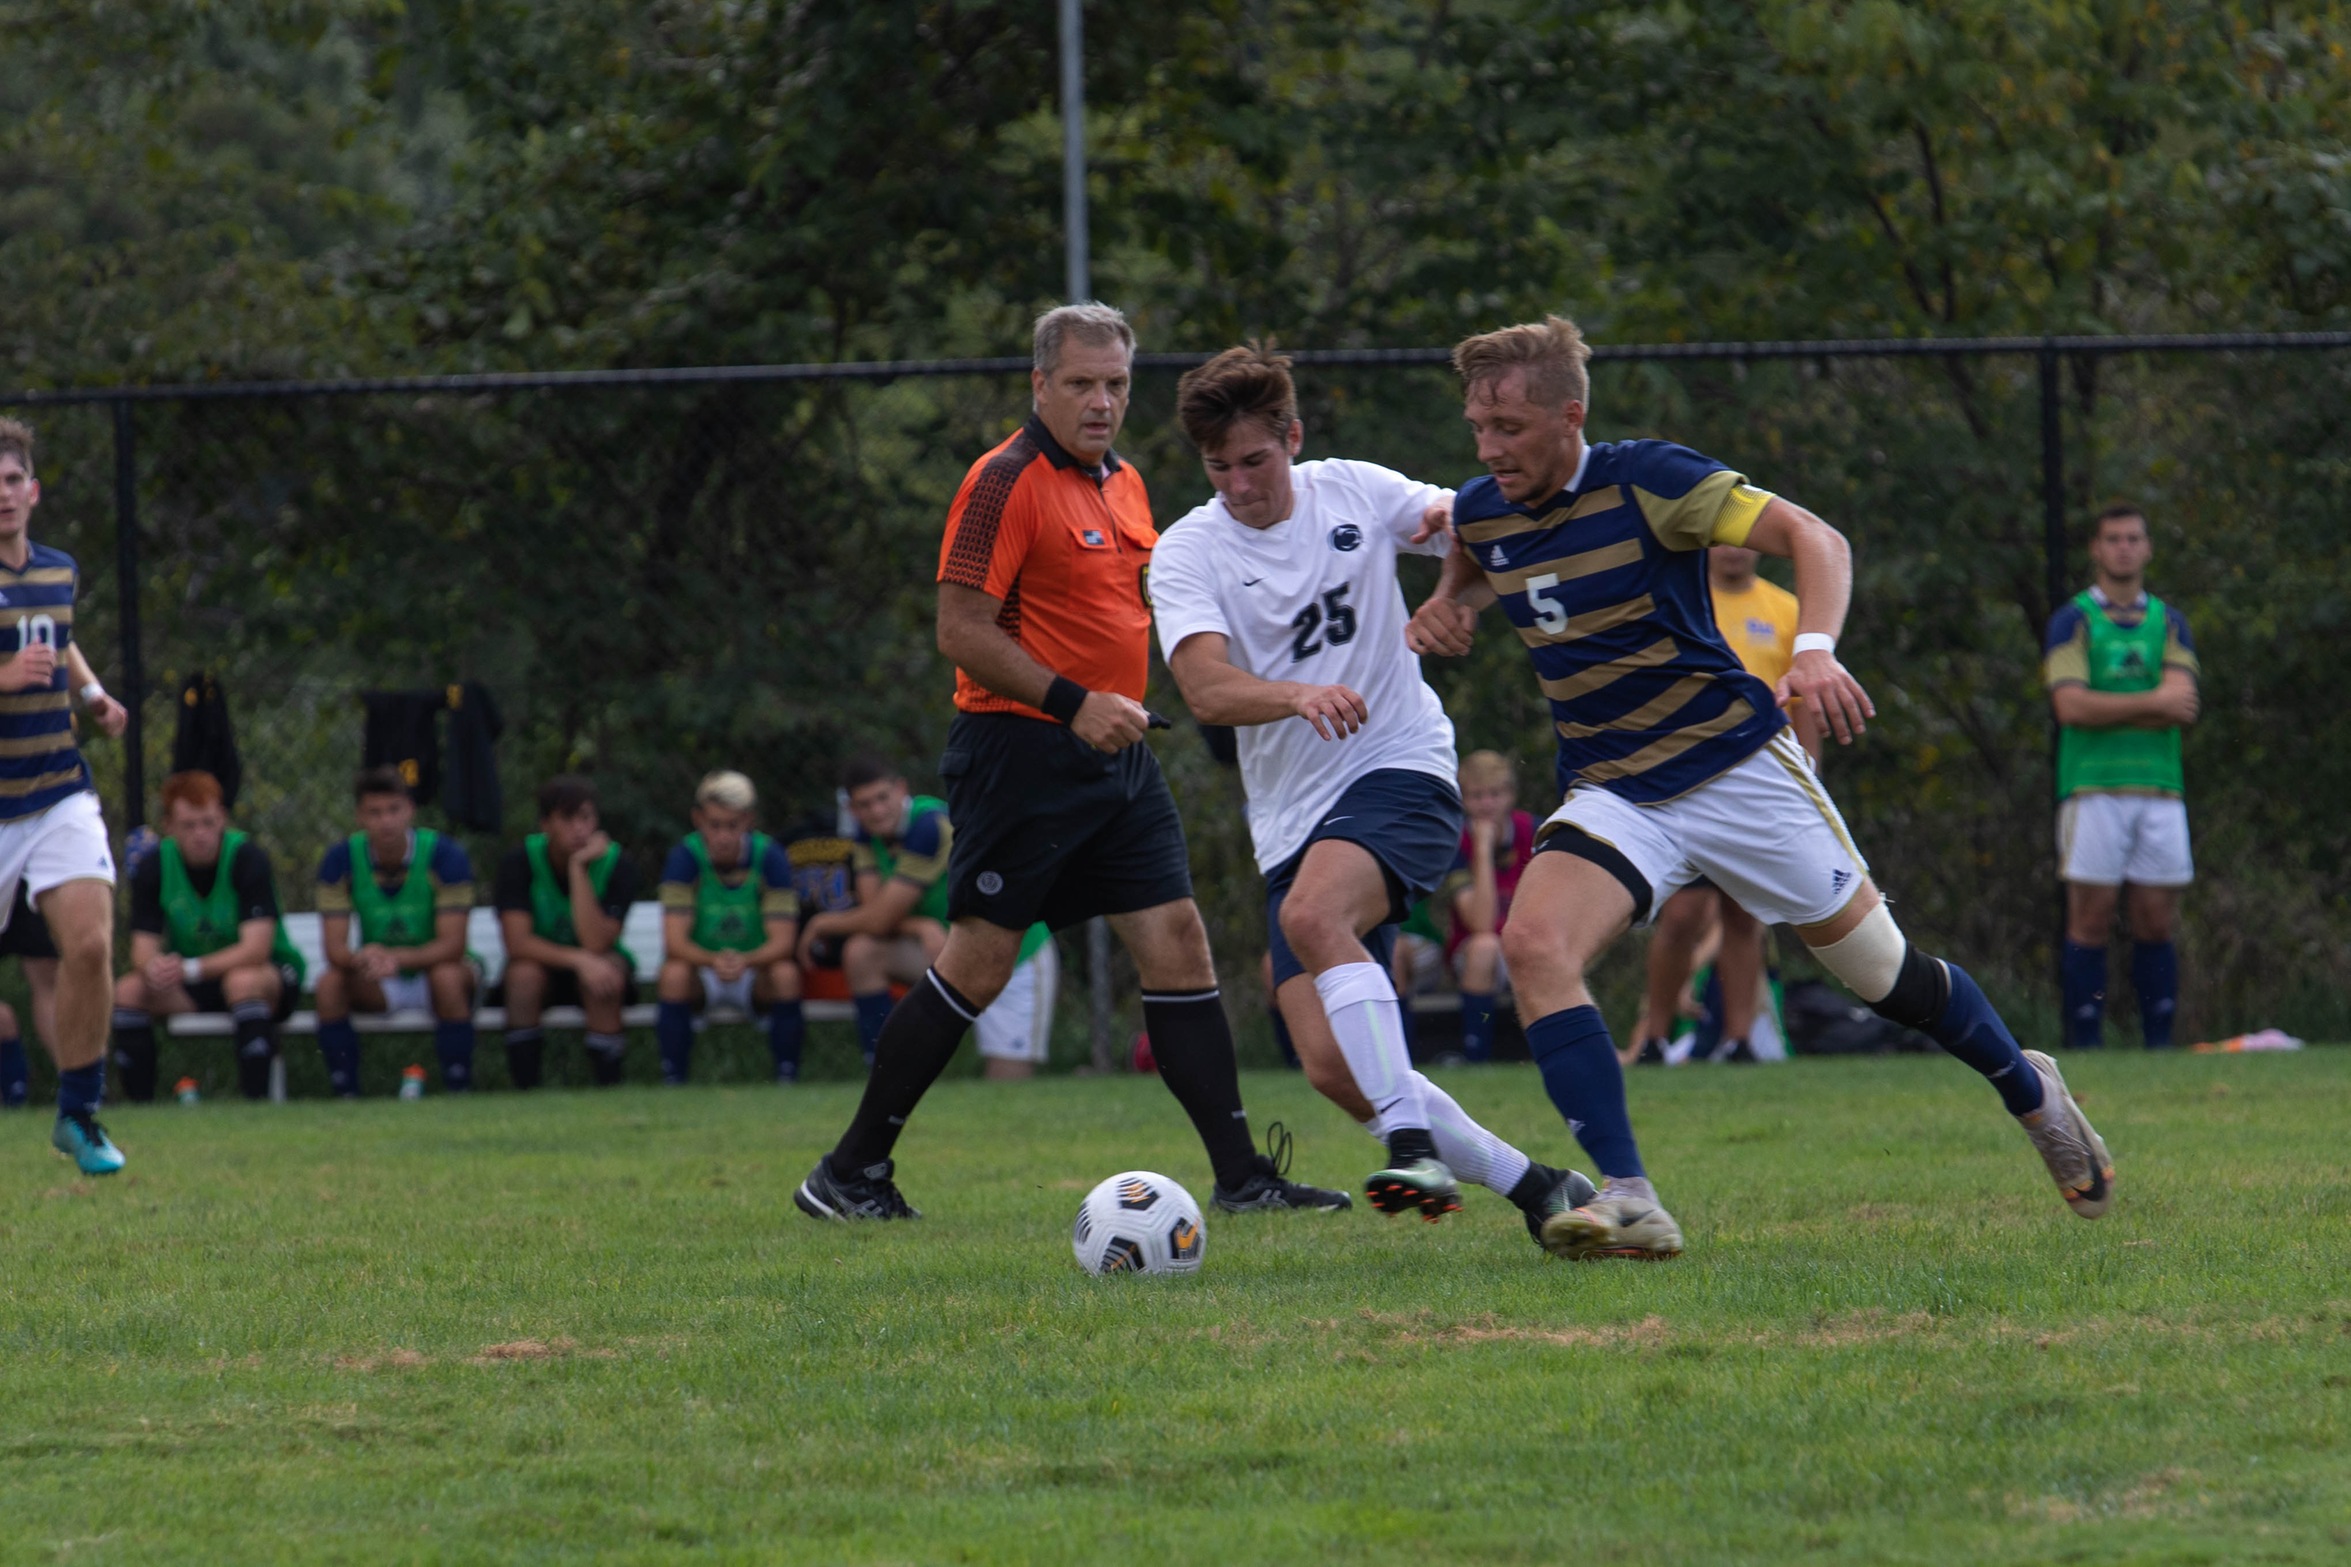 Vincent Gigliotti dribbles past a defender.